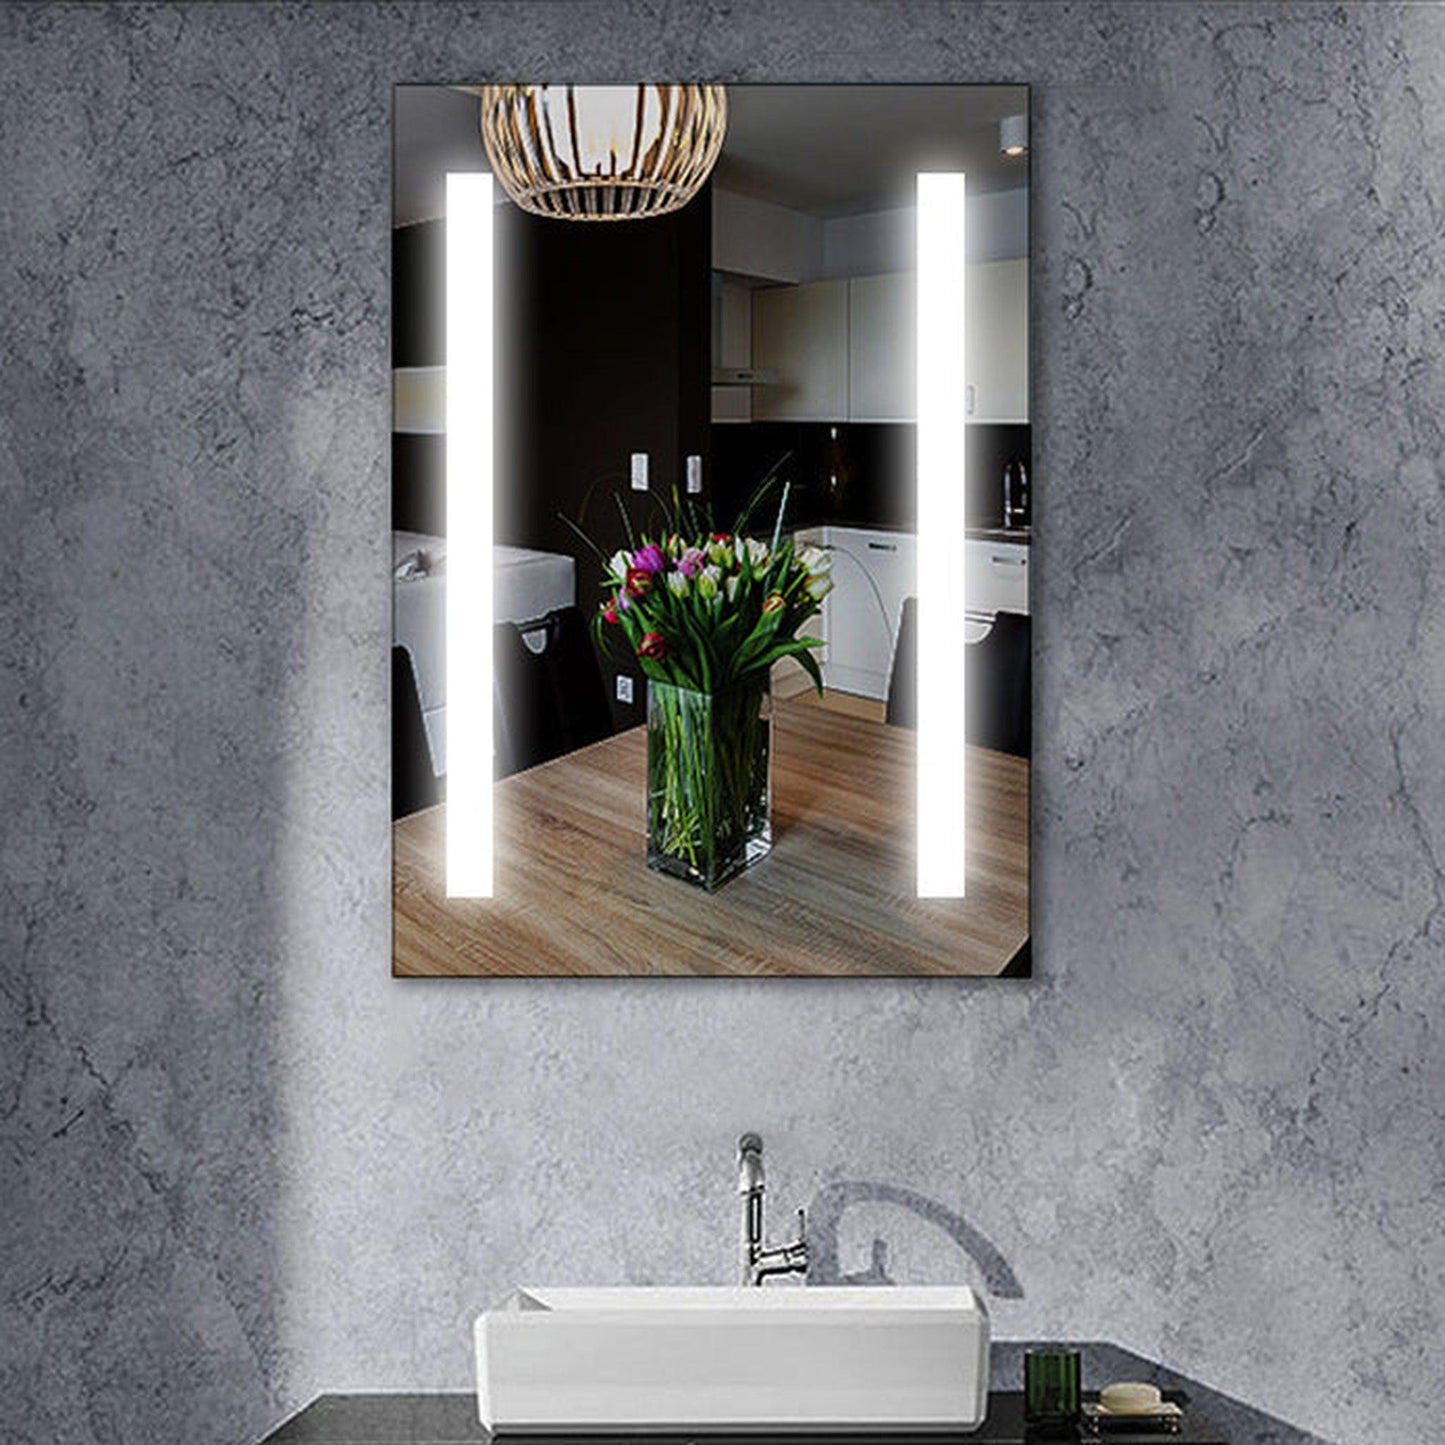 Vanity Art 24" W x 28" H LED Lighted Bathroom Vanity Wall Mirror With Touch Sensor Switch